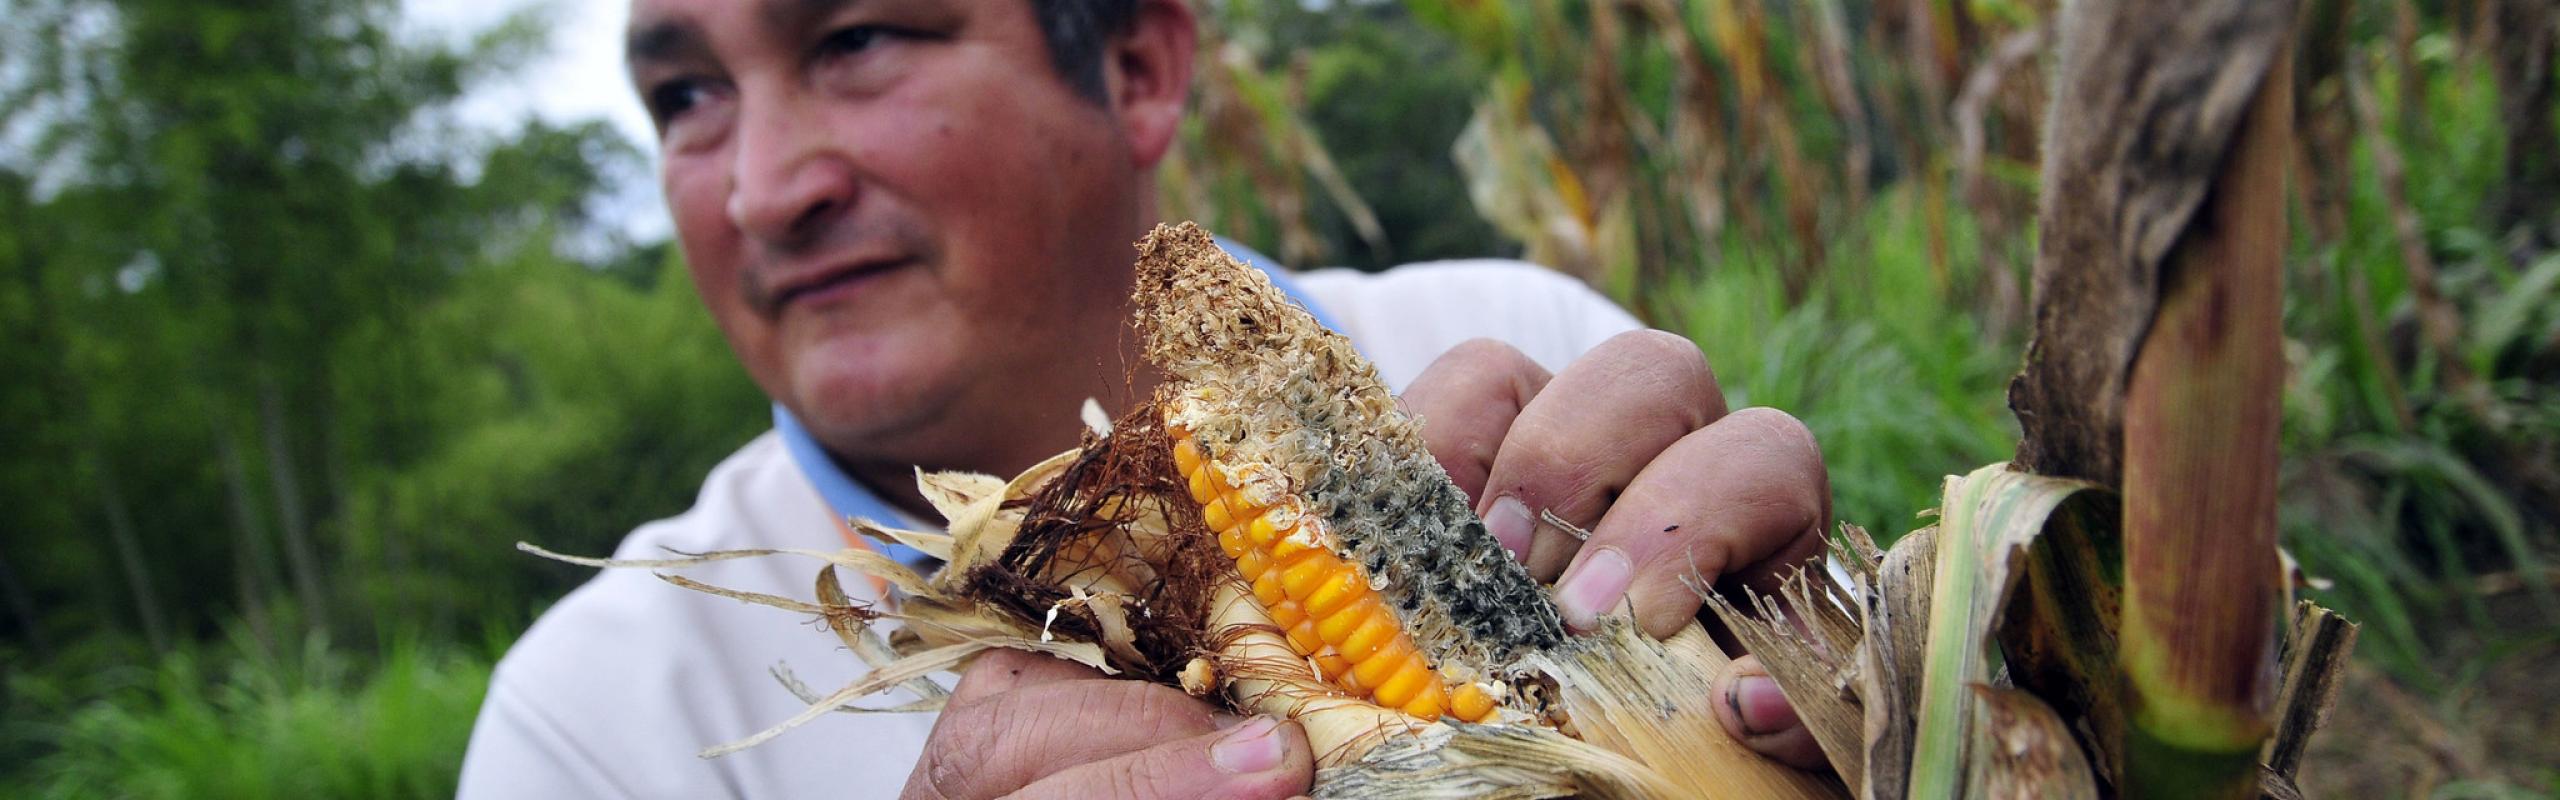 Colombian maize farmer stands in field with damaged crop